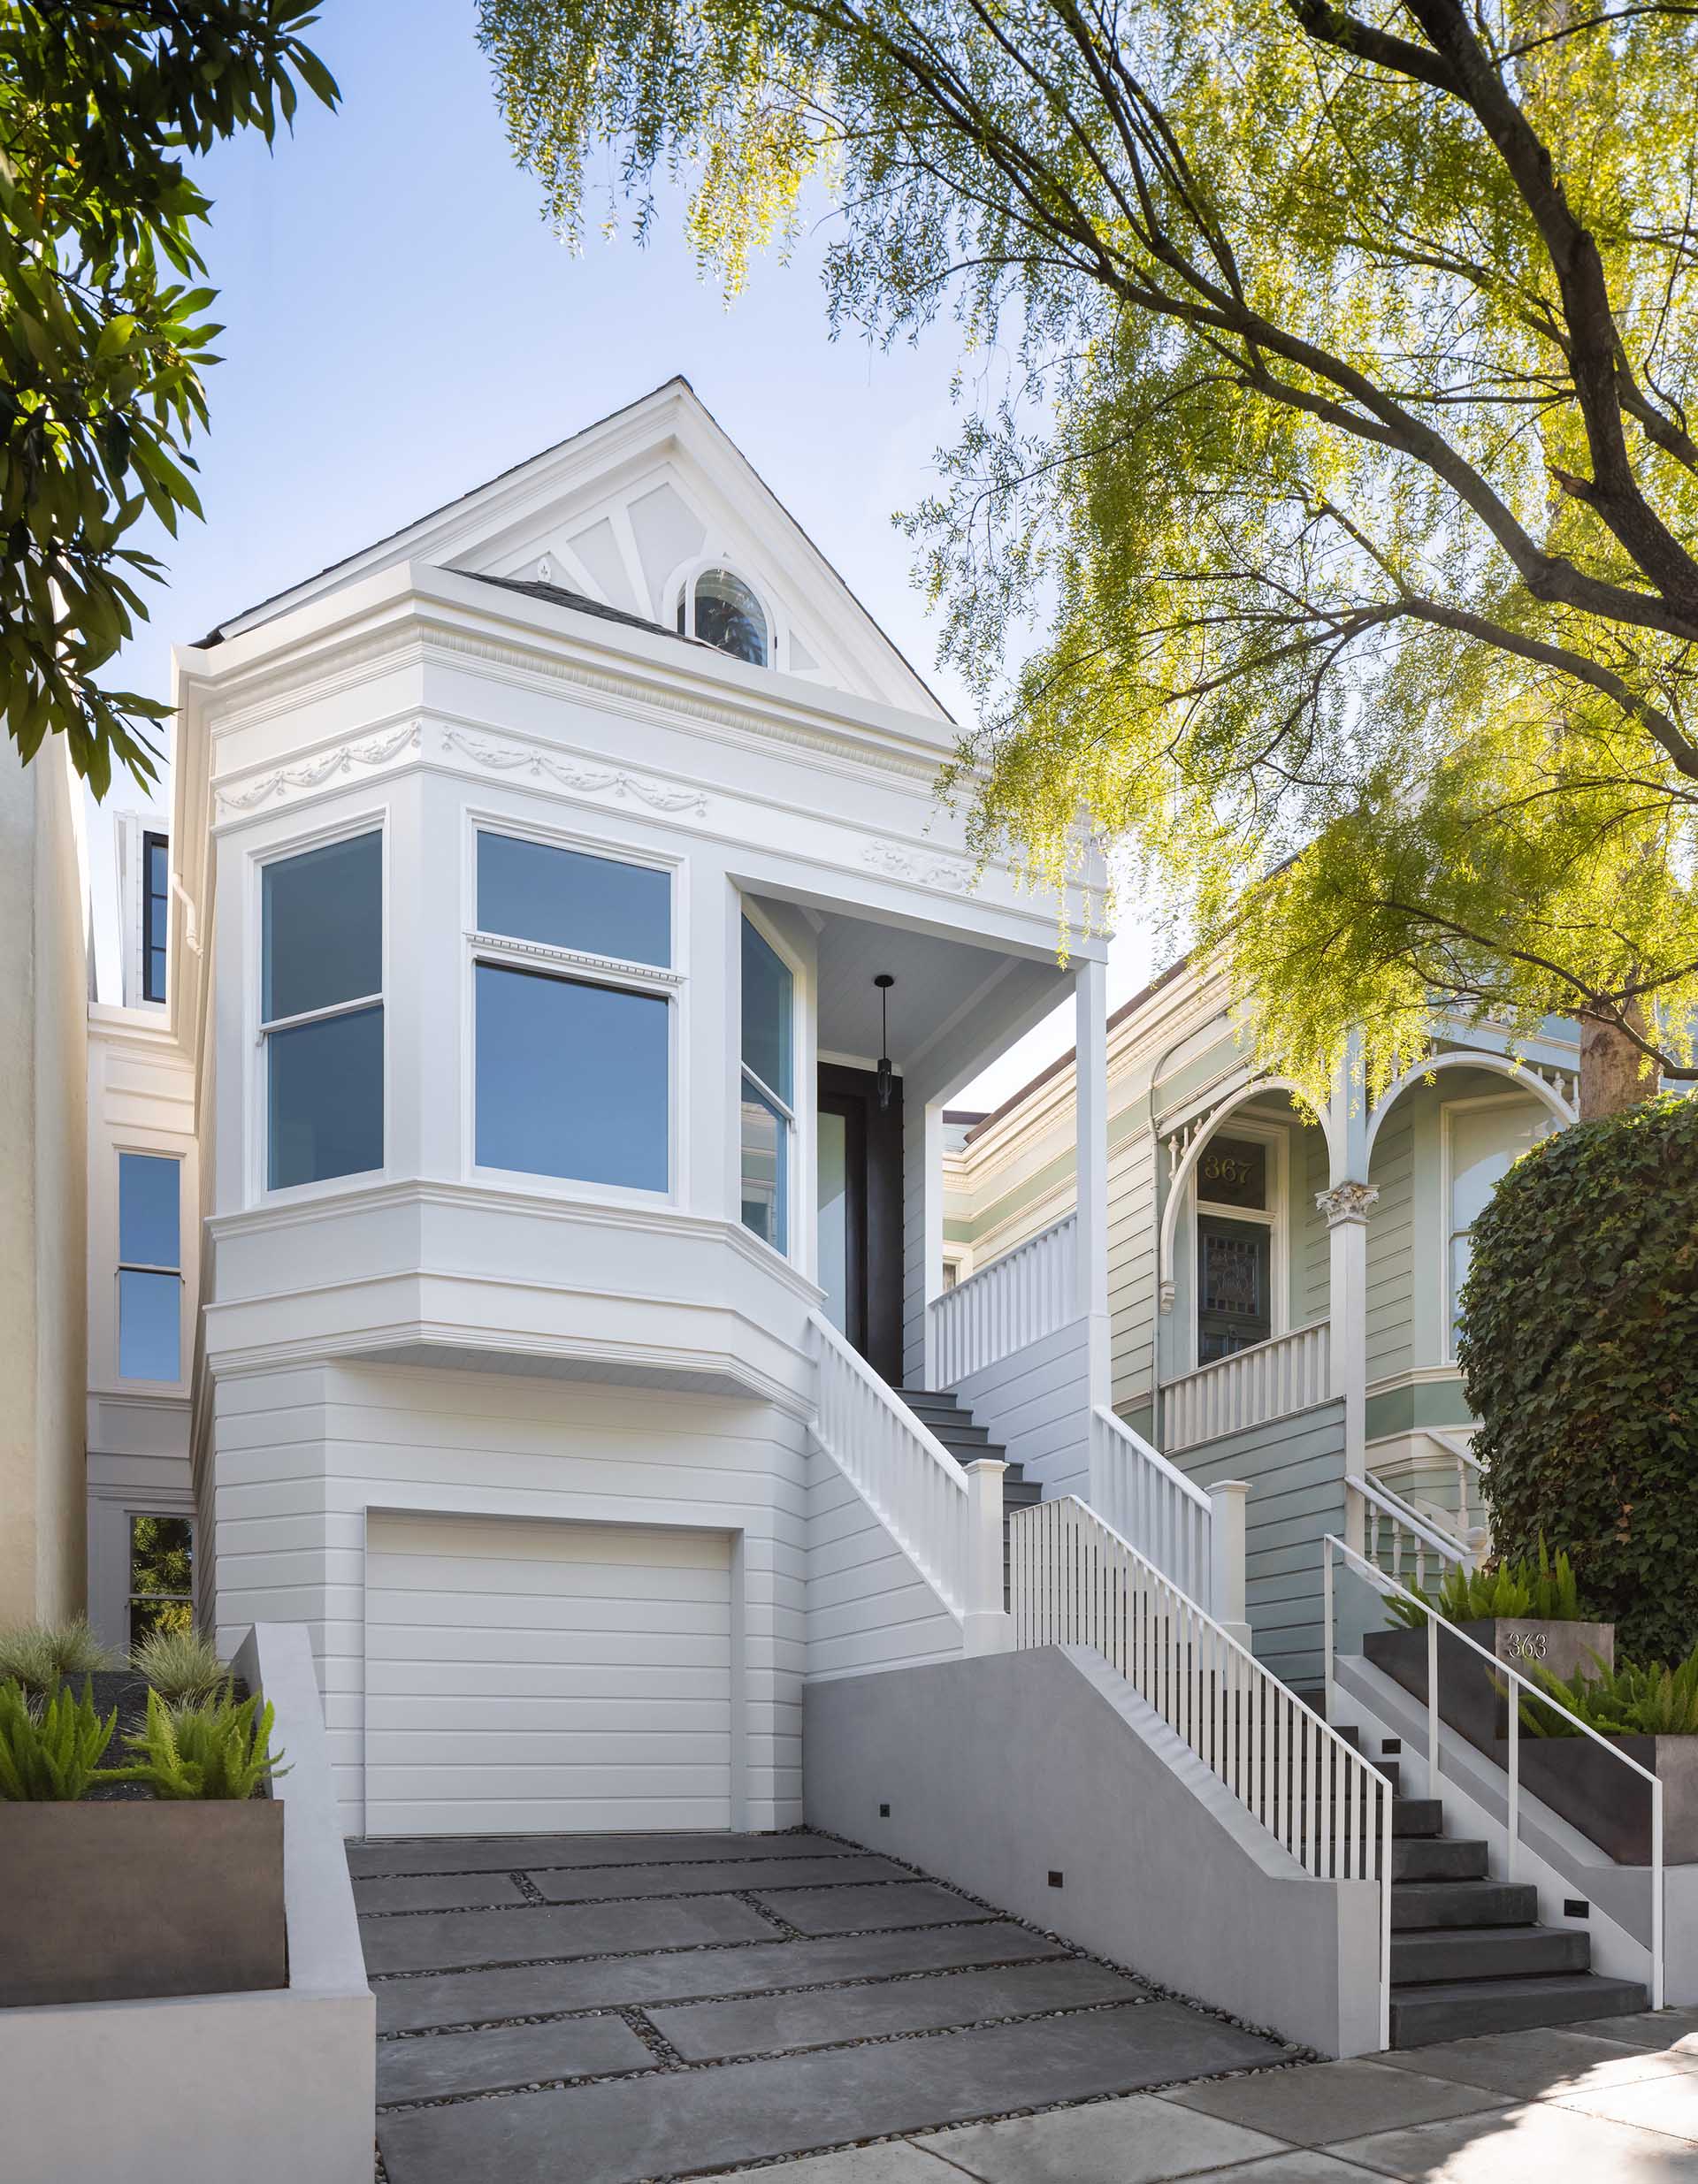 A renovated 1890 Victorian heritage home in Noe Valley.